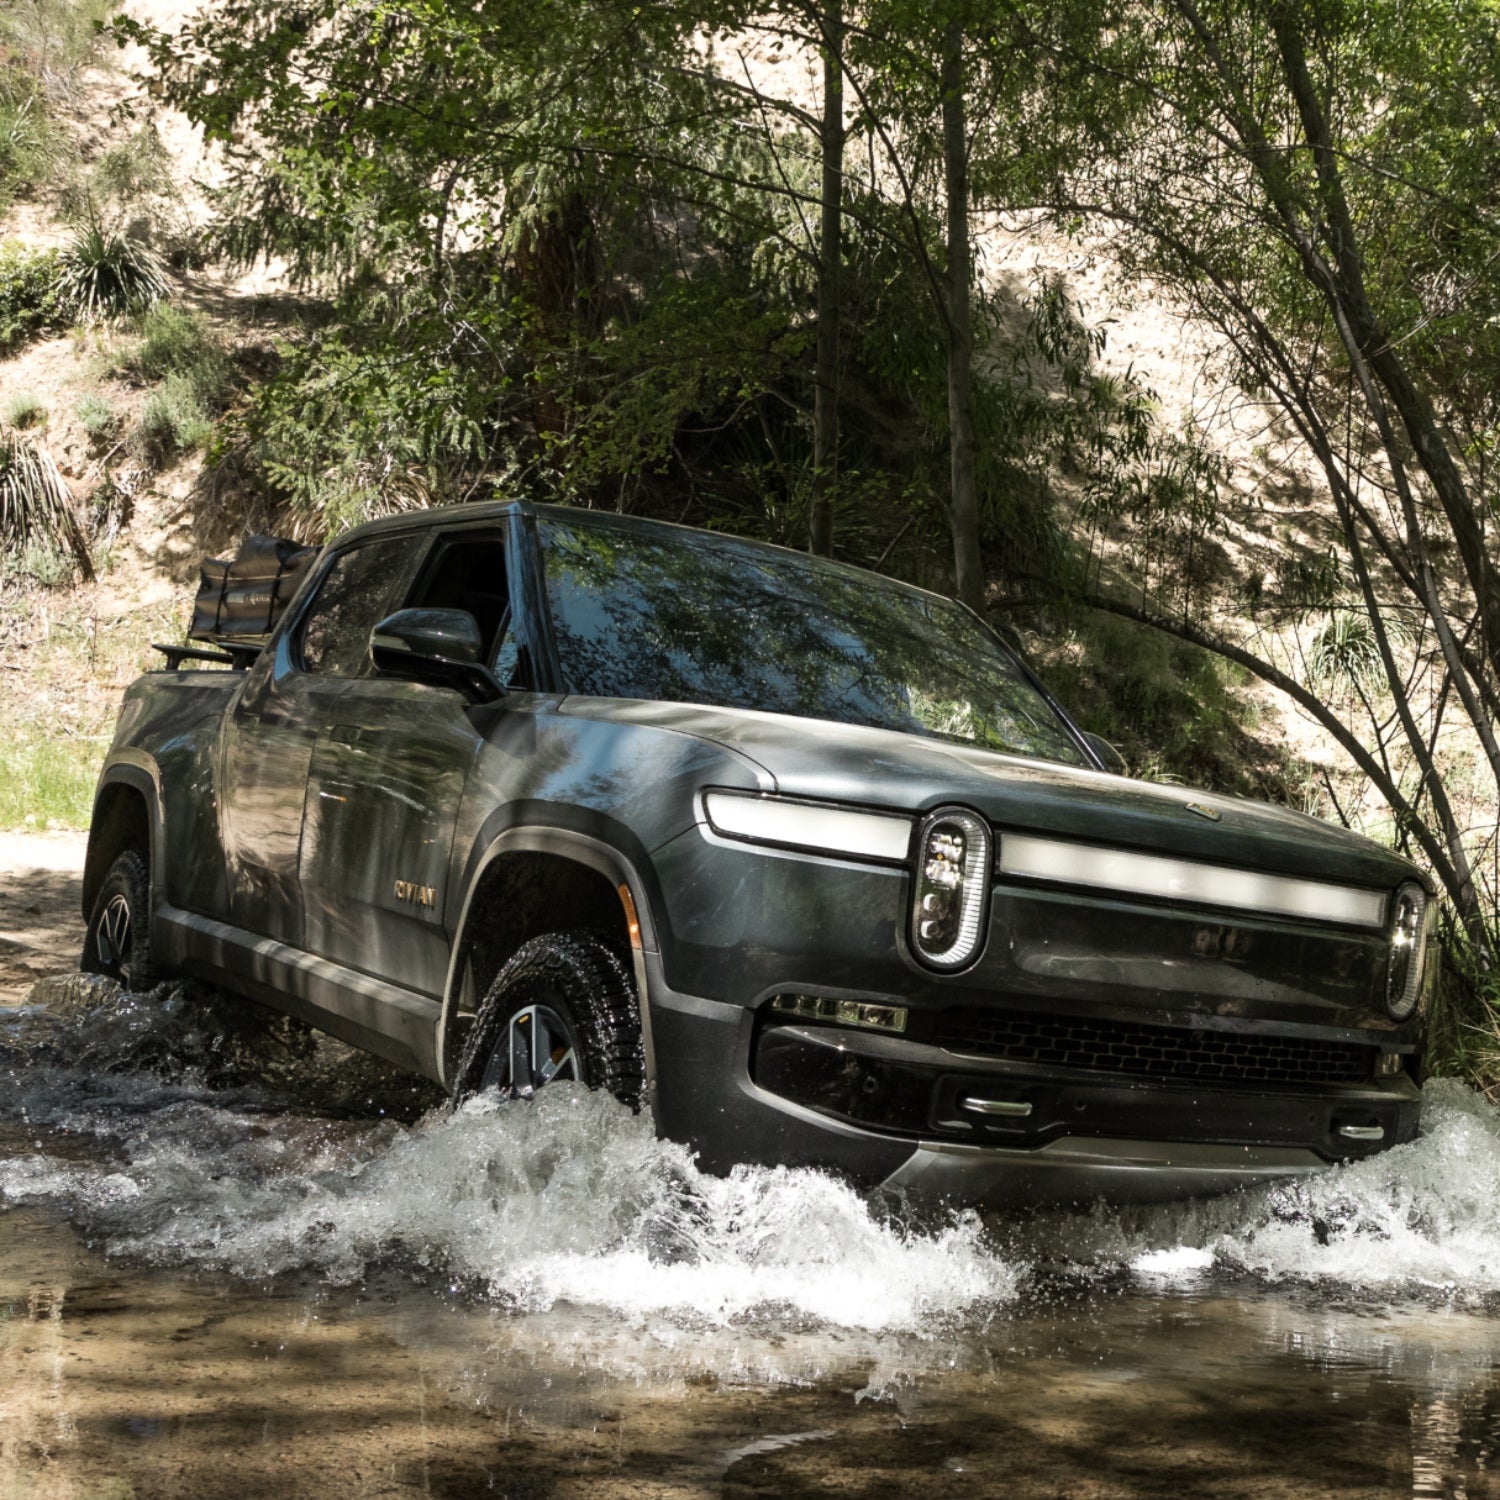 Rivian aims for a piece of the pickup and SUV markets with EV truck